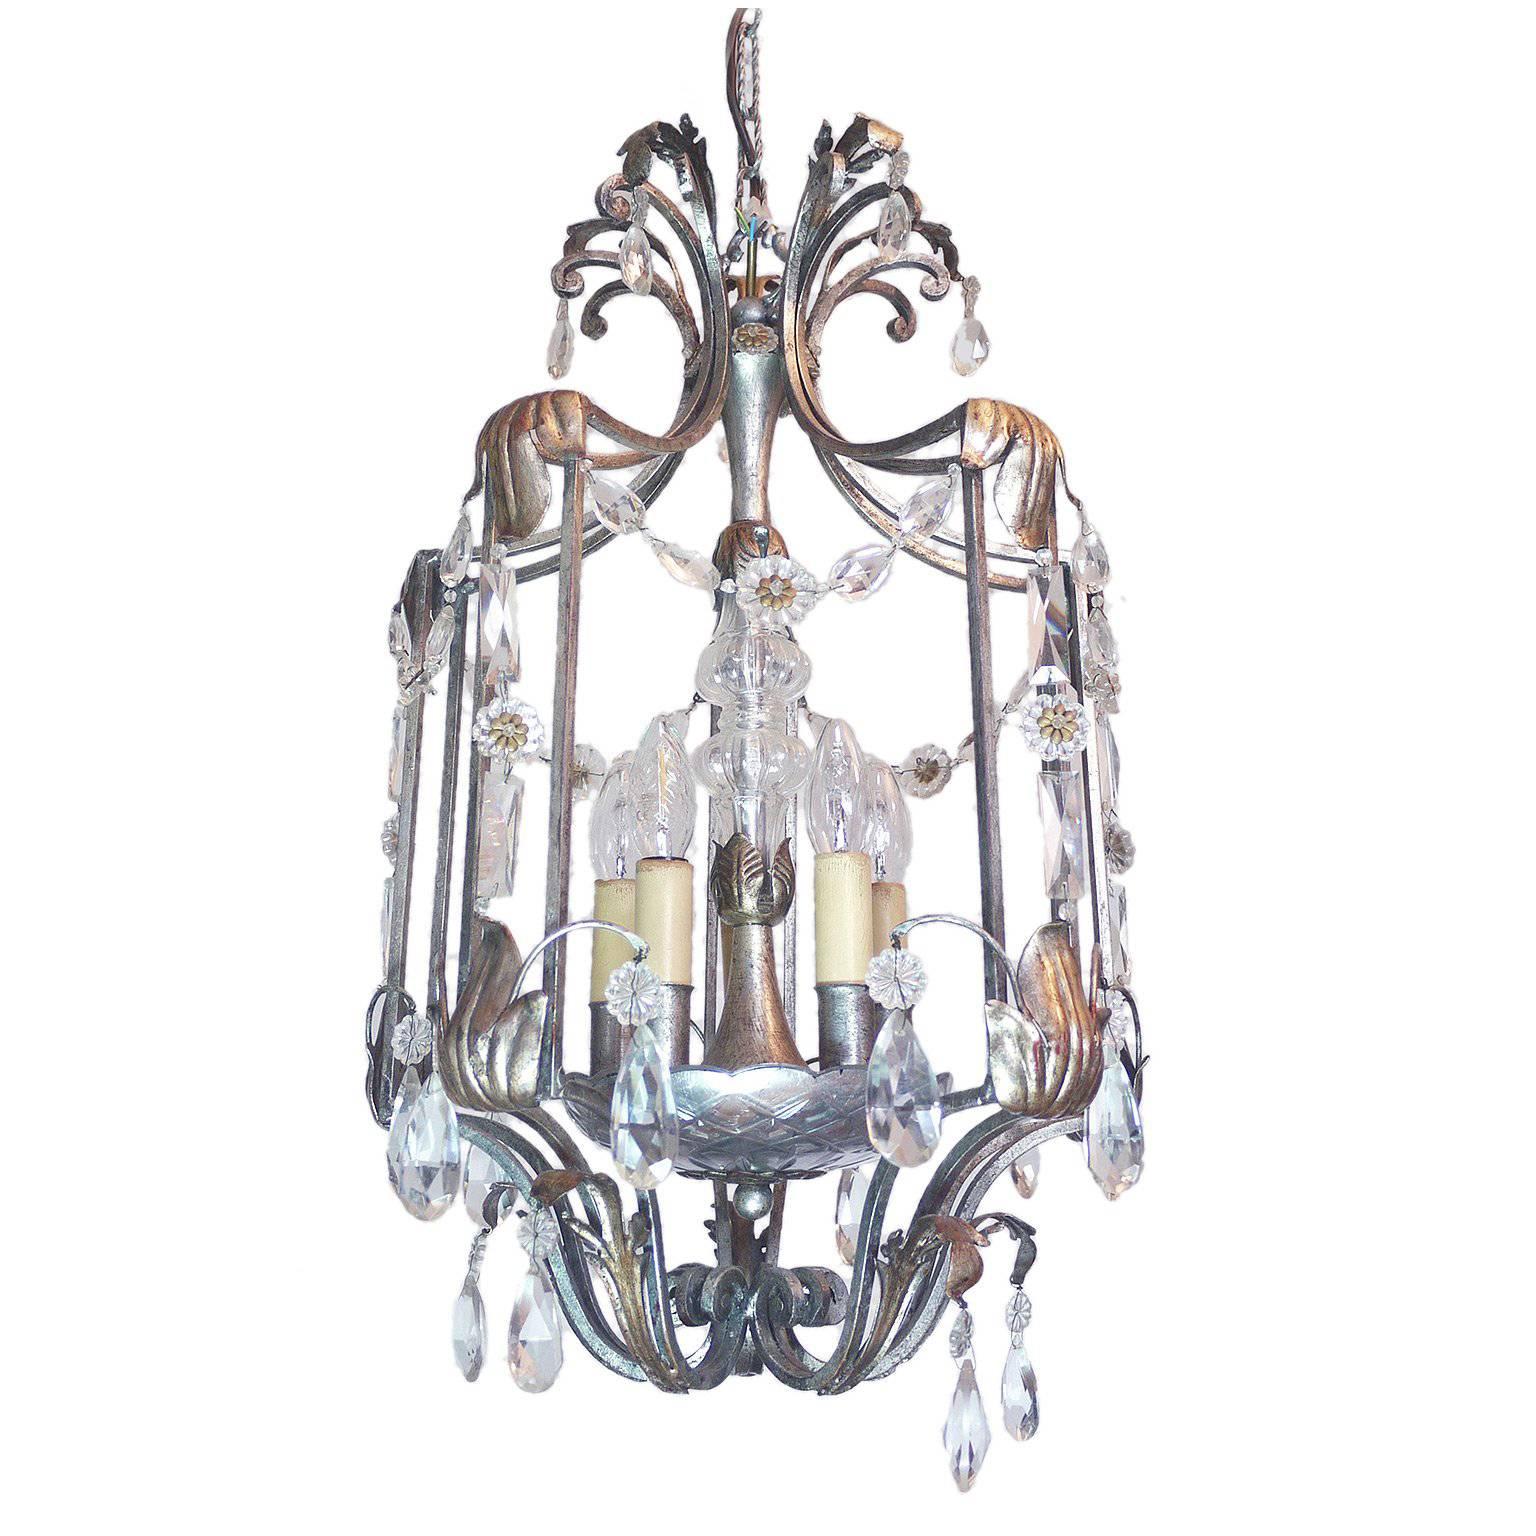 Florentine Chandelier Crystal and Wrought Iron Lantern by BF Art, Italy